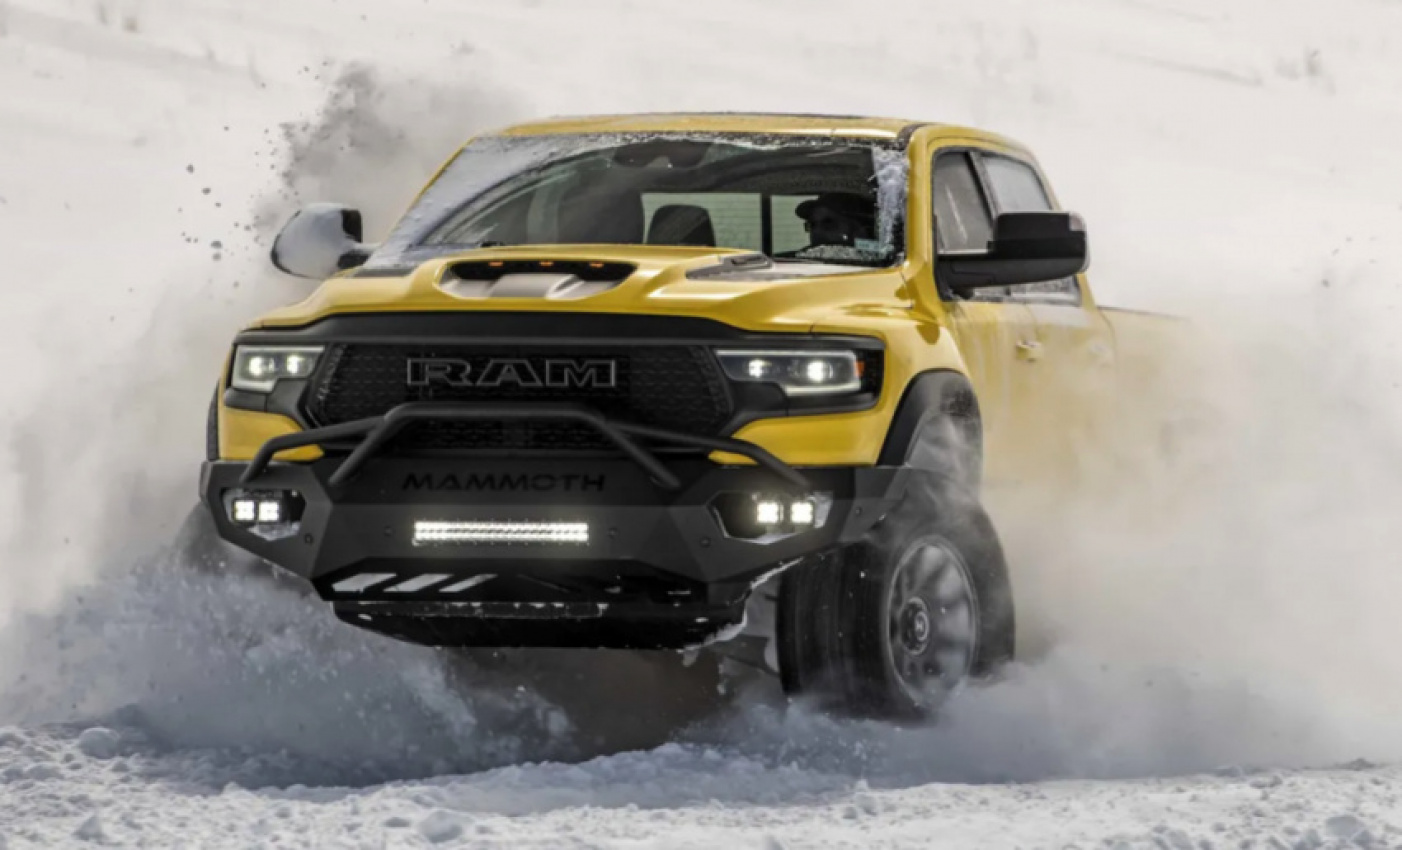 autos, cars, hennessey, ram, why is this hennessey mammoth ram 1500 trx so slow?